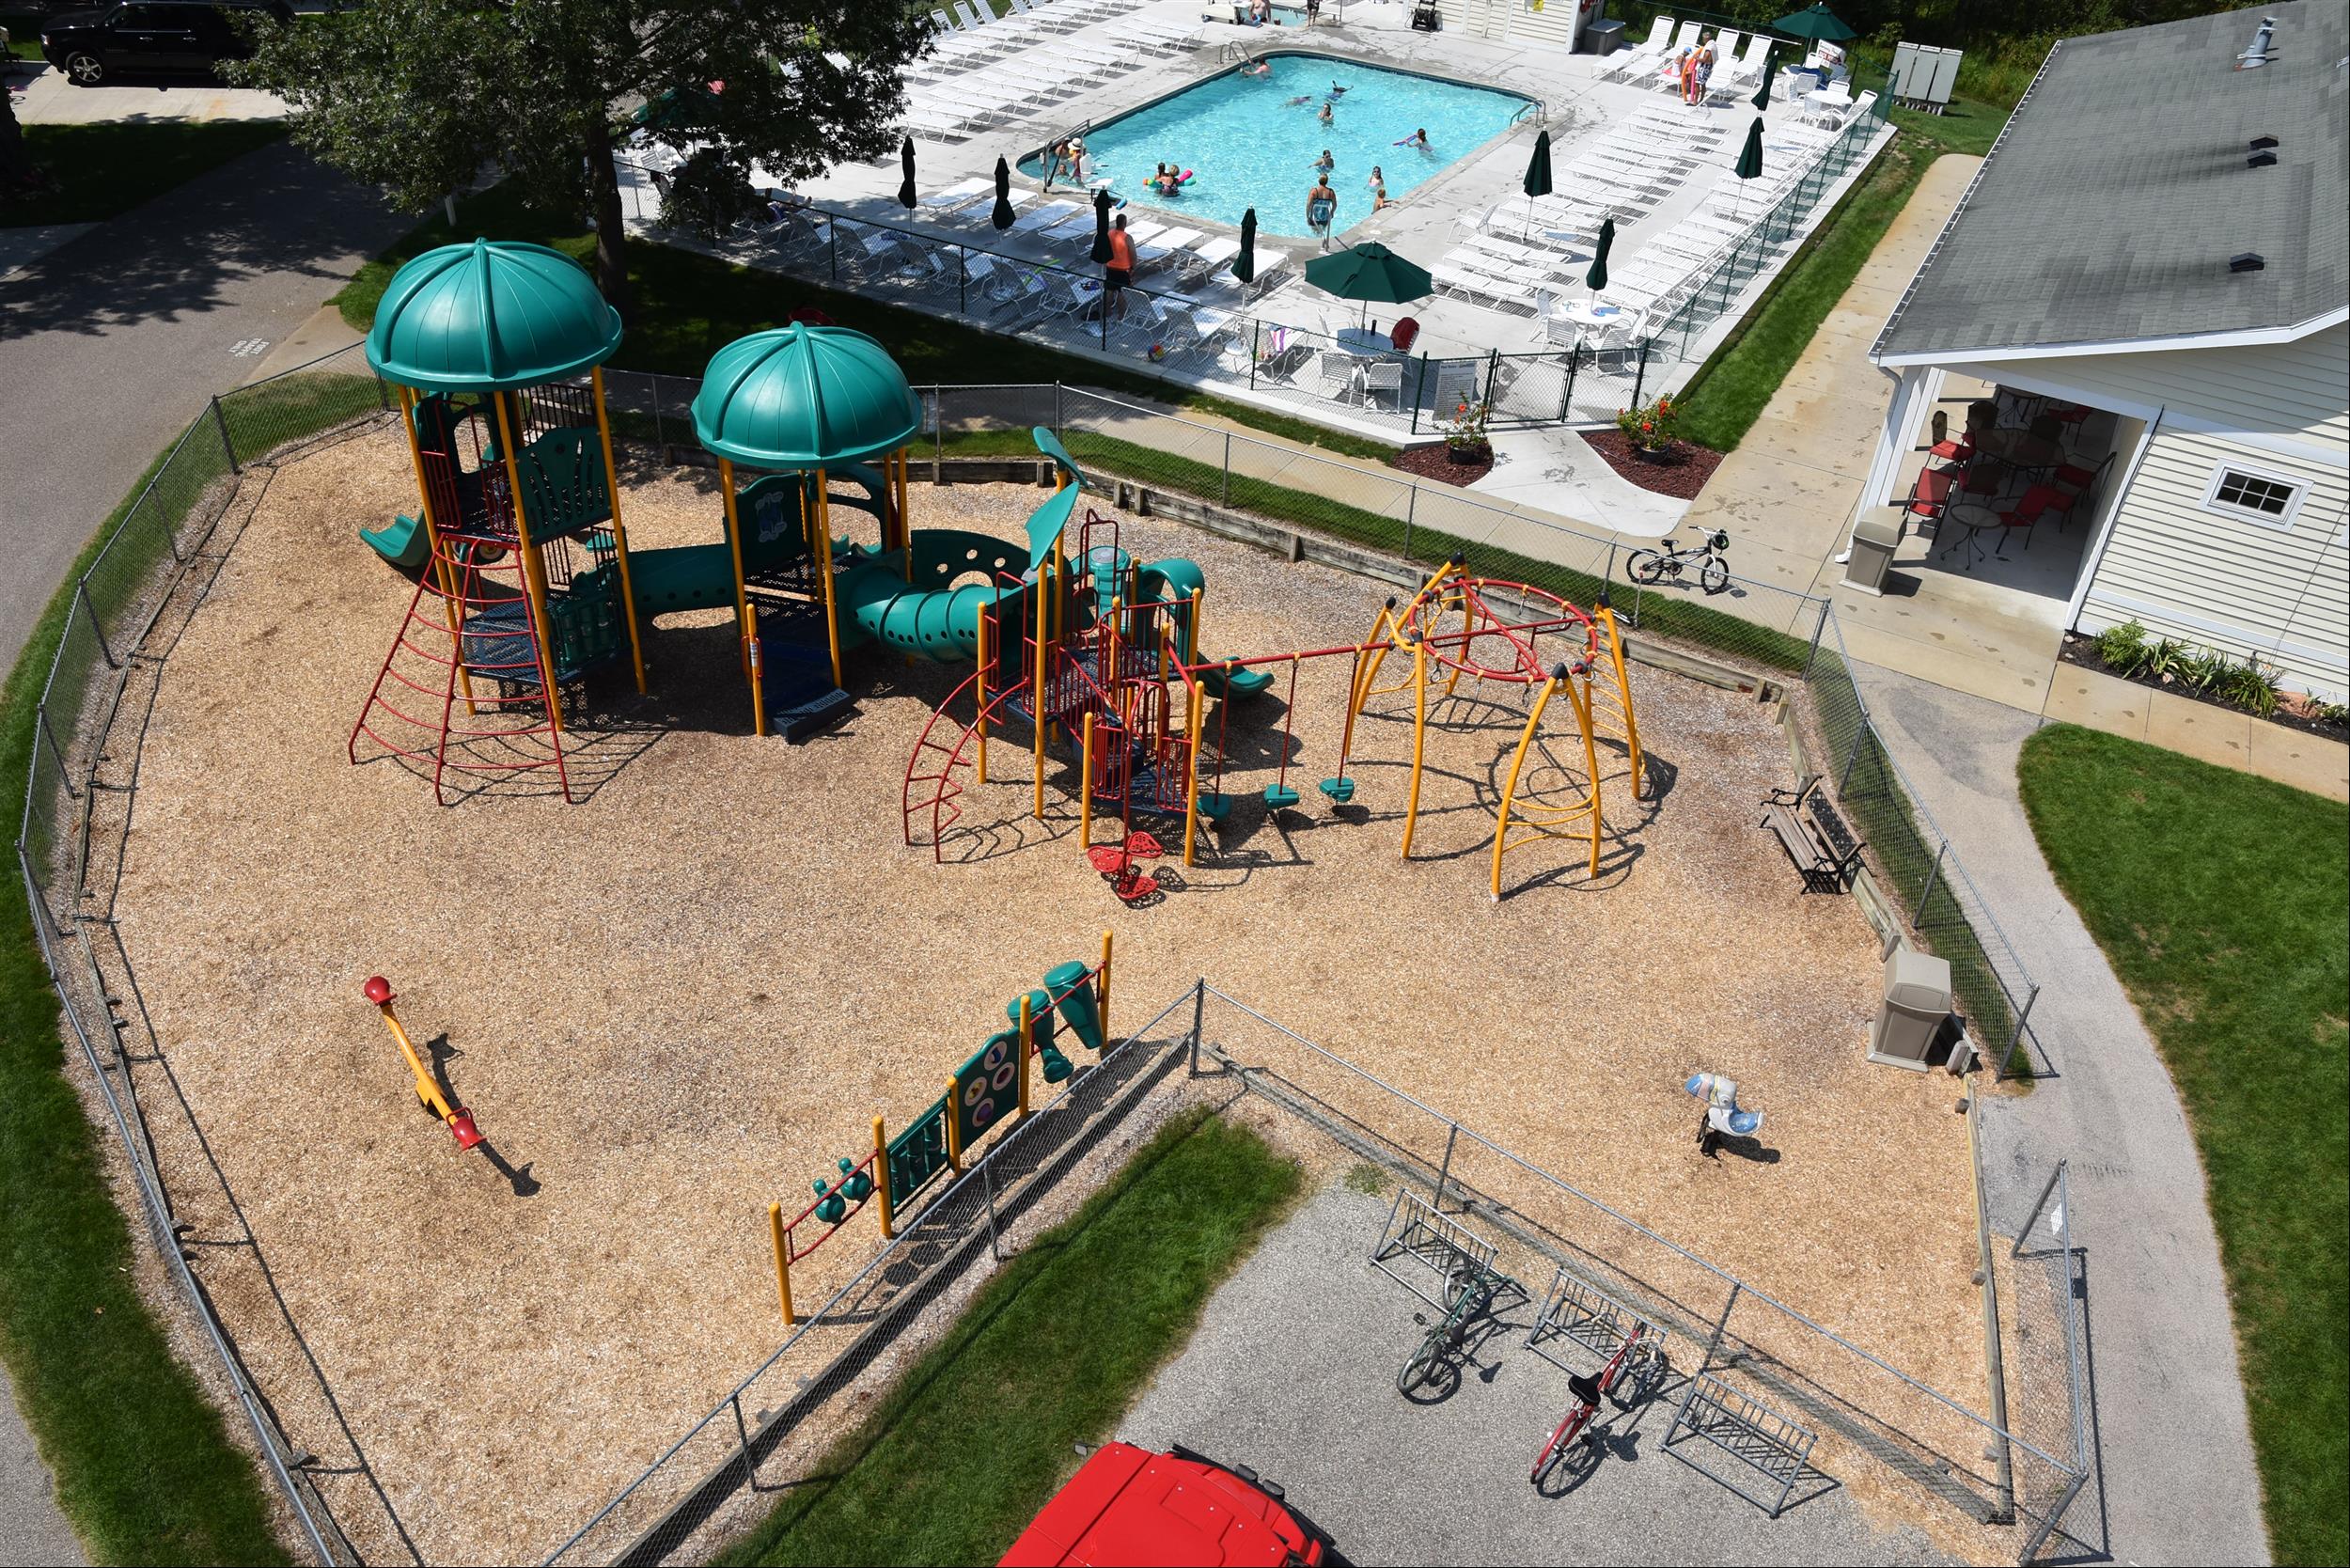 Overview of Vacation Station Playground.